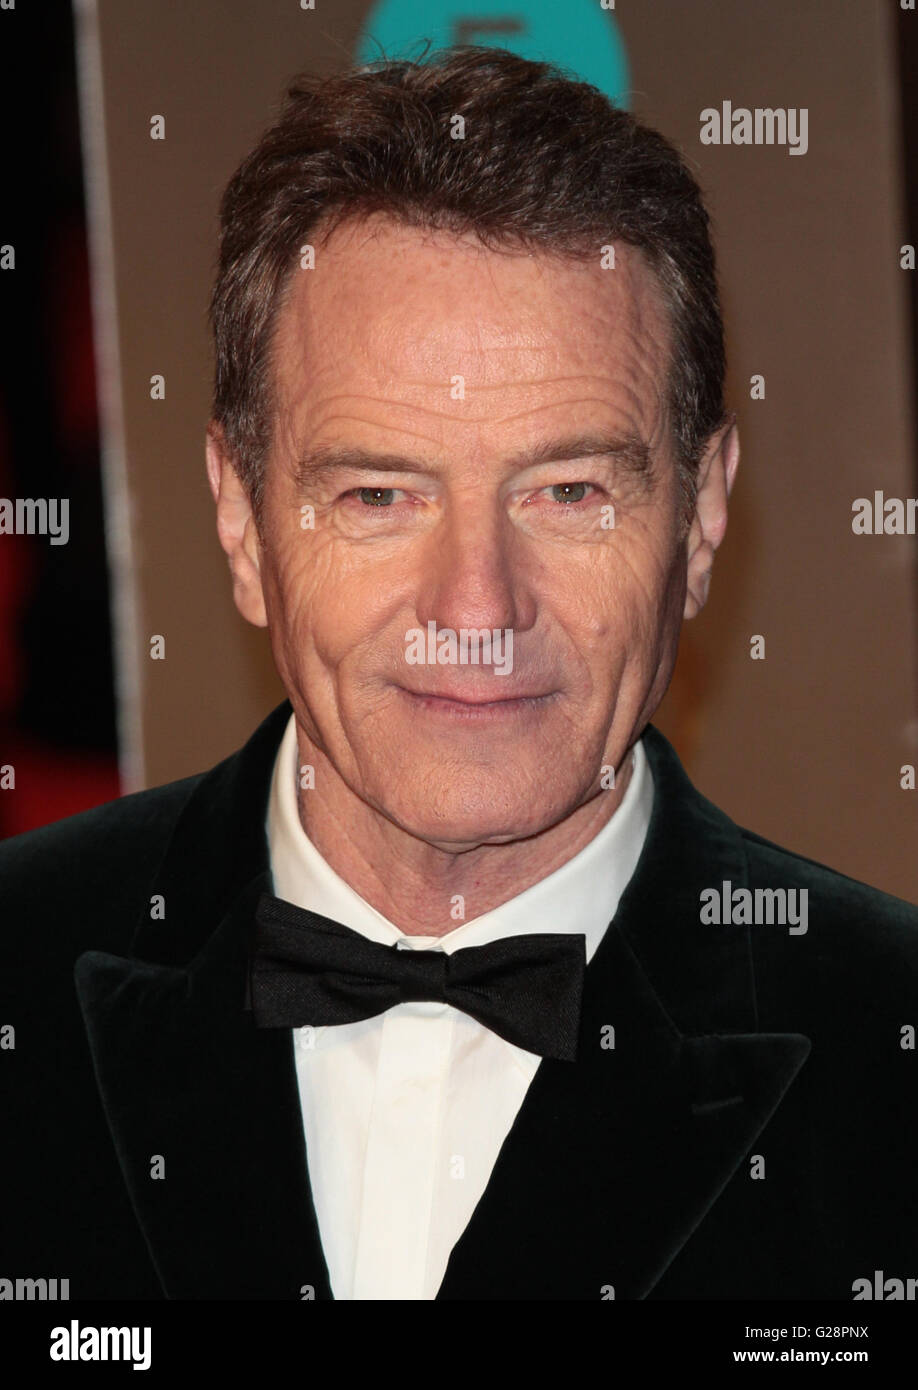 Bryan Cranston attends the EE Bafta British Academy Film Awards at the Royal Opera House on Feb 14, 2016 in London Stock Photo